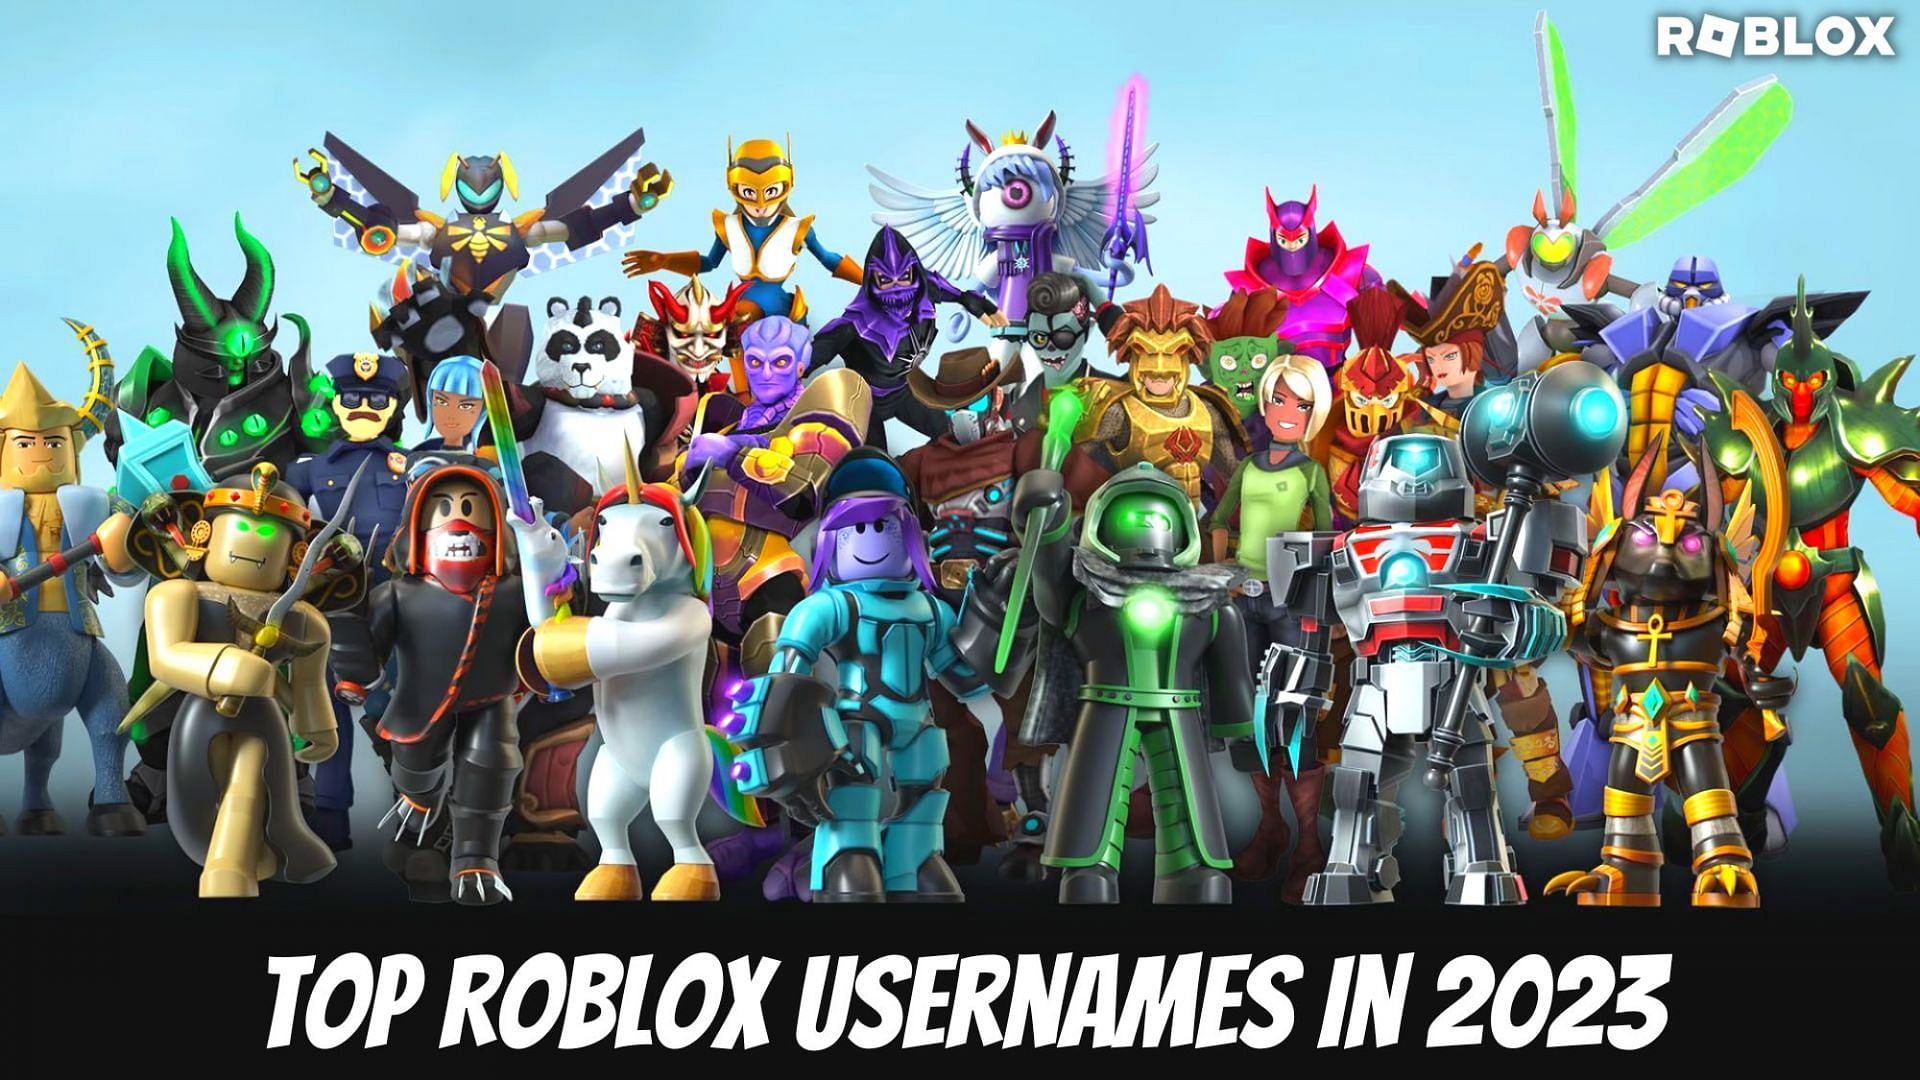 Top 5 Roblox Usernames for 2023